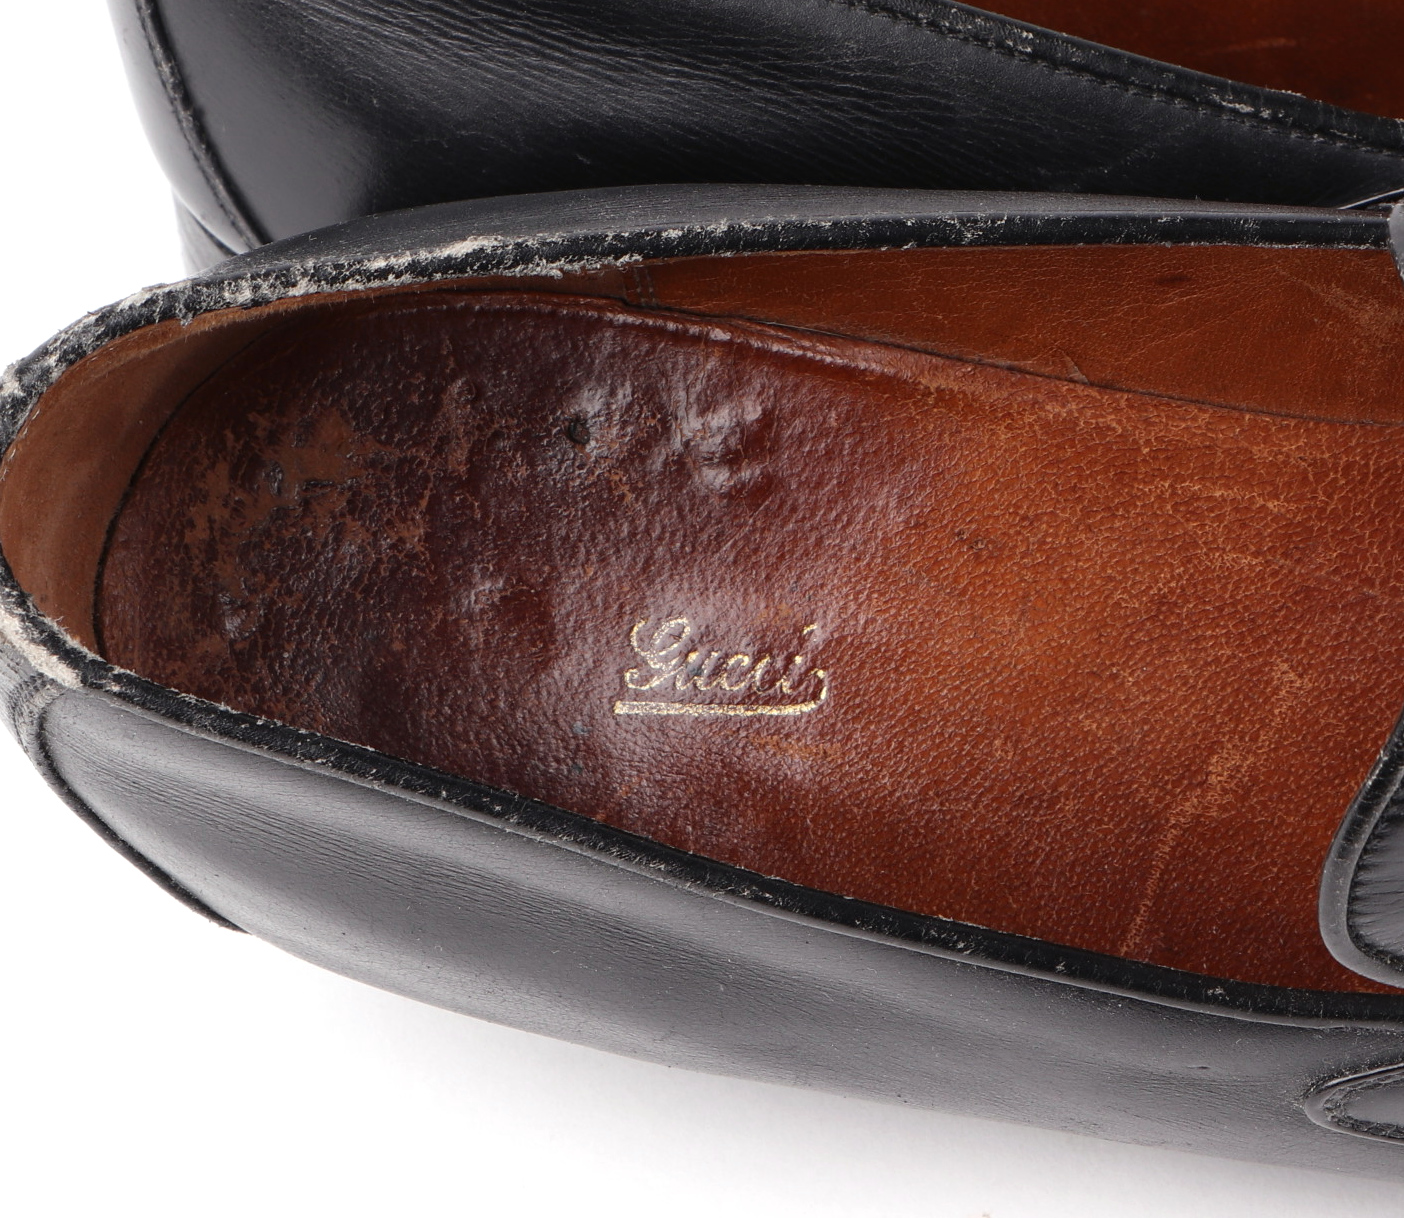 A pair of vintage Gucci gentleman's loafers with original dust bags and box, UK size 9.5, with signs - Image 5 of 7